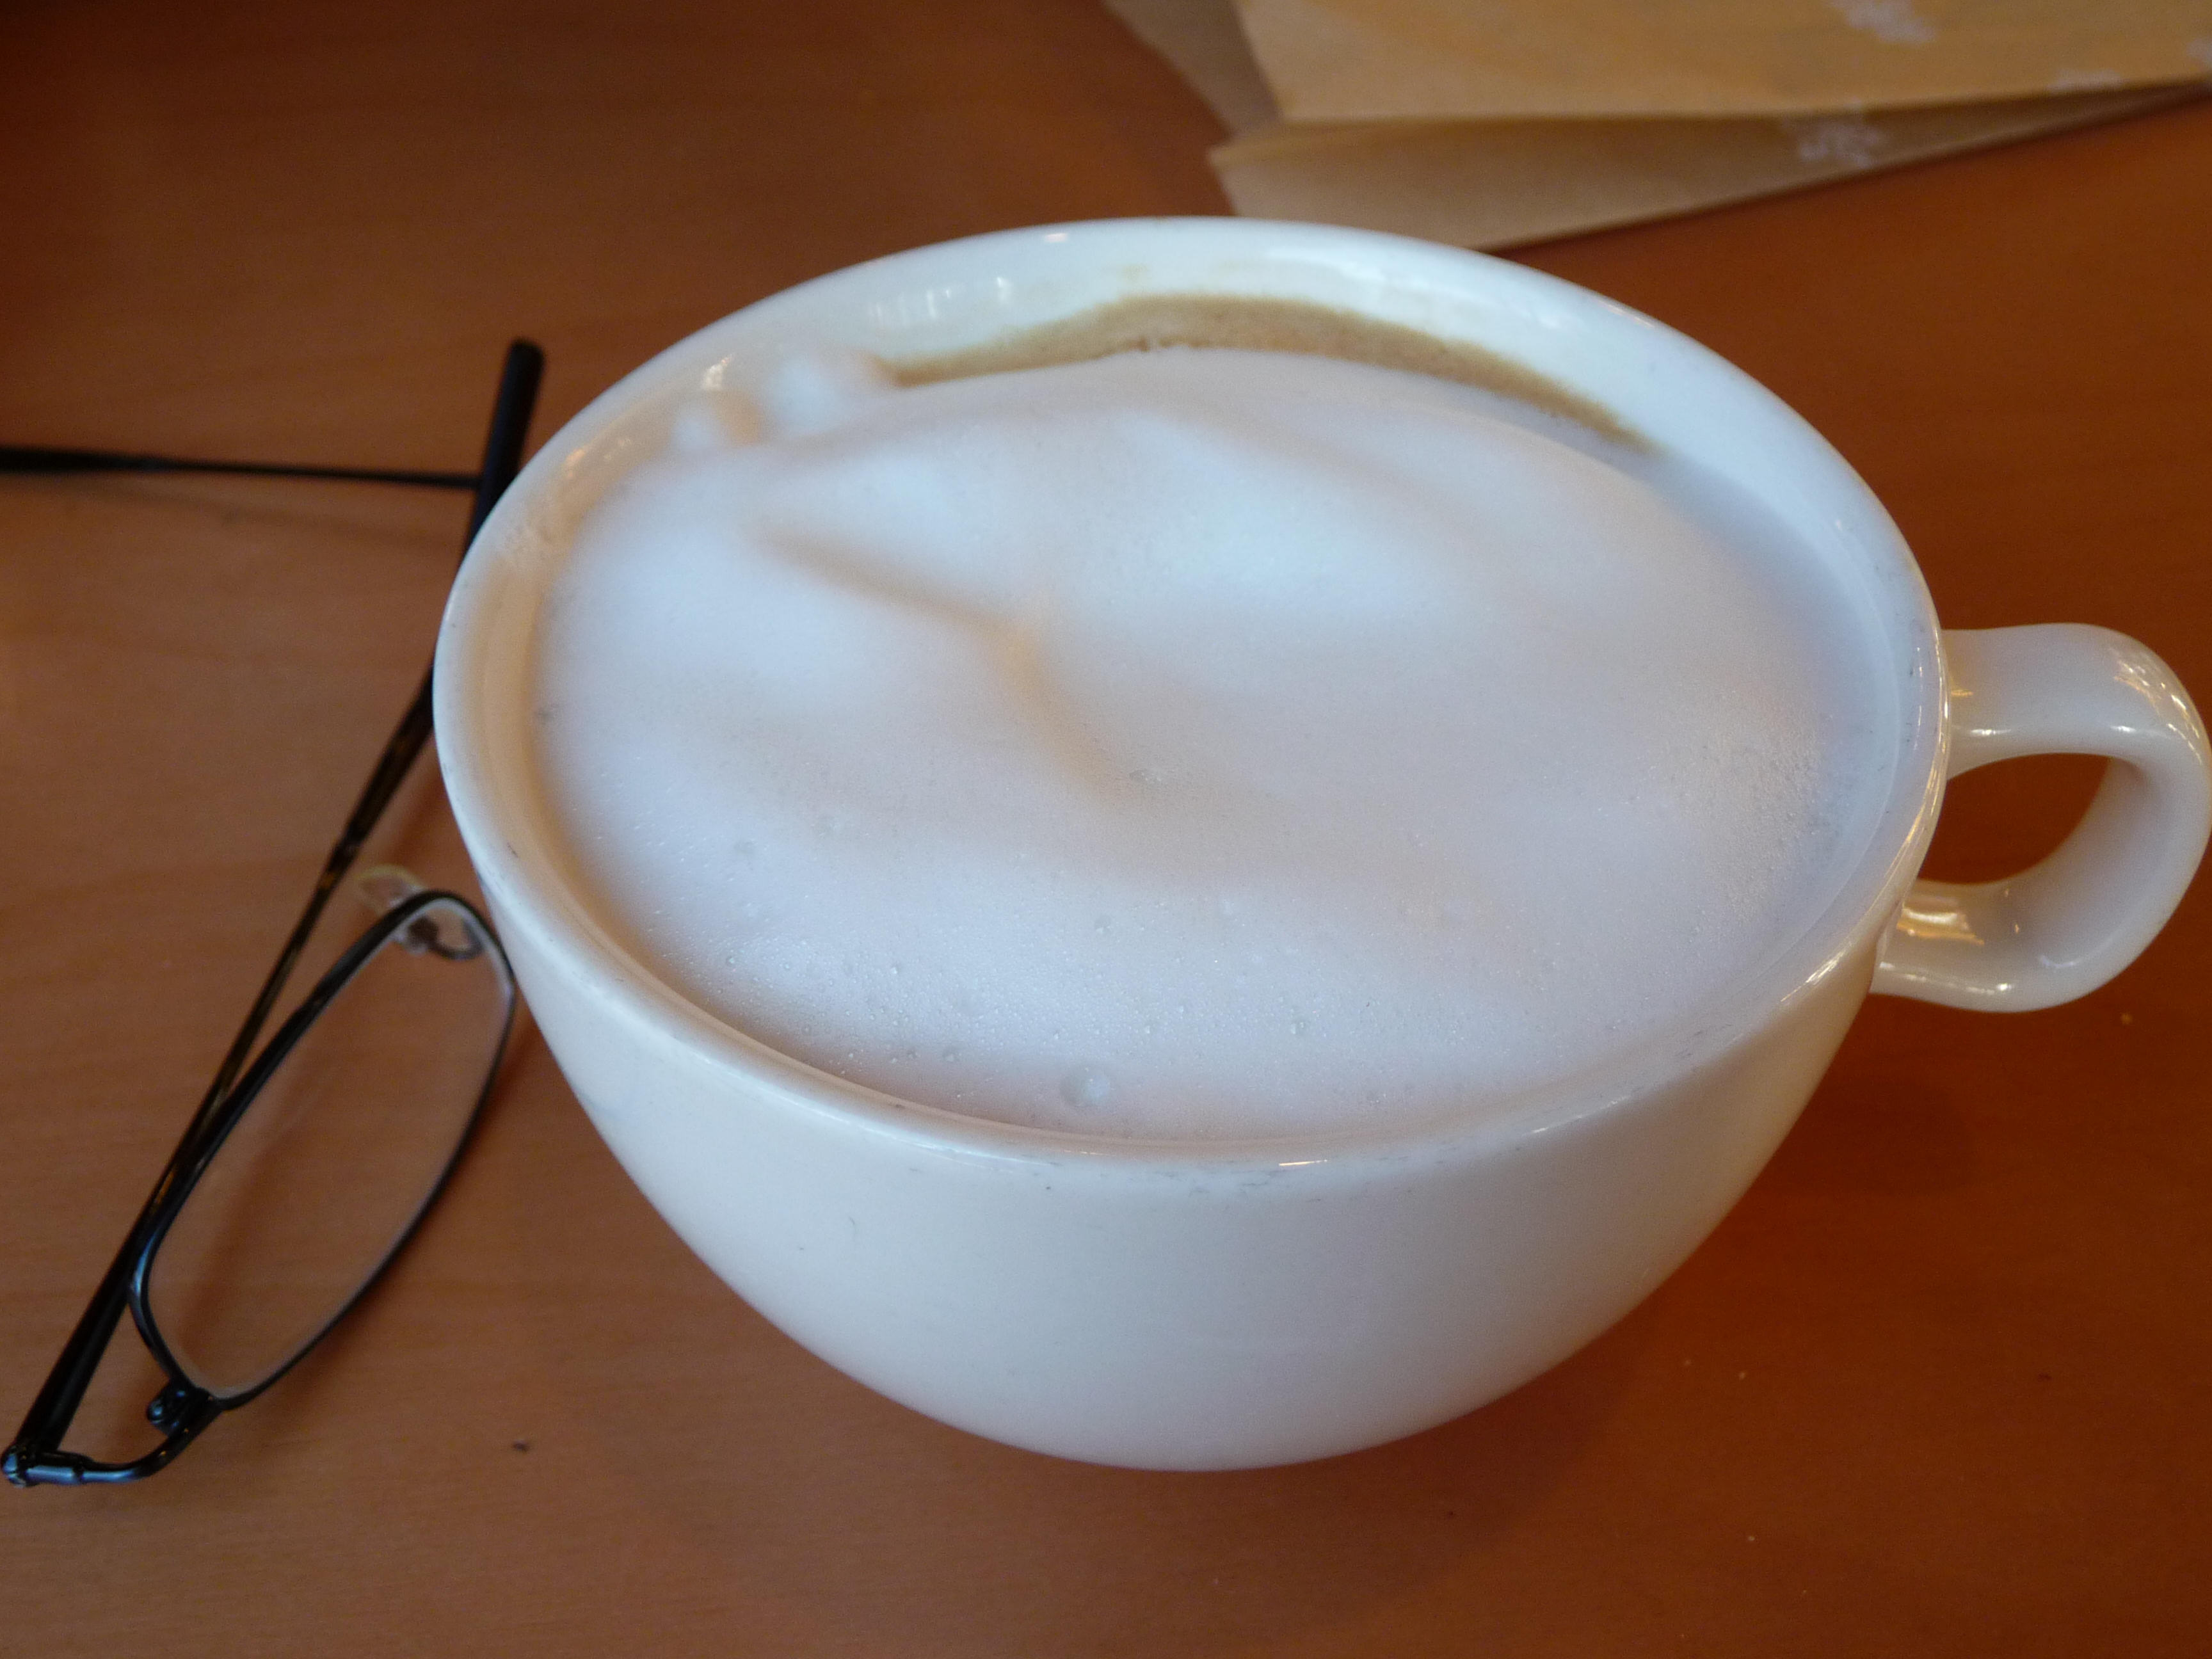 It is a pretty (though large) cappuccino